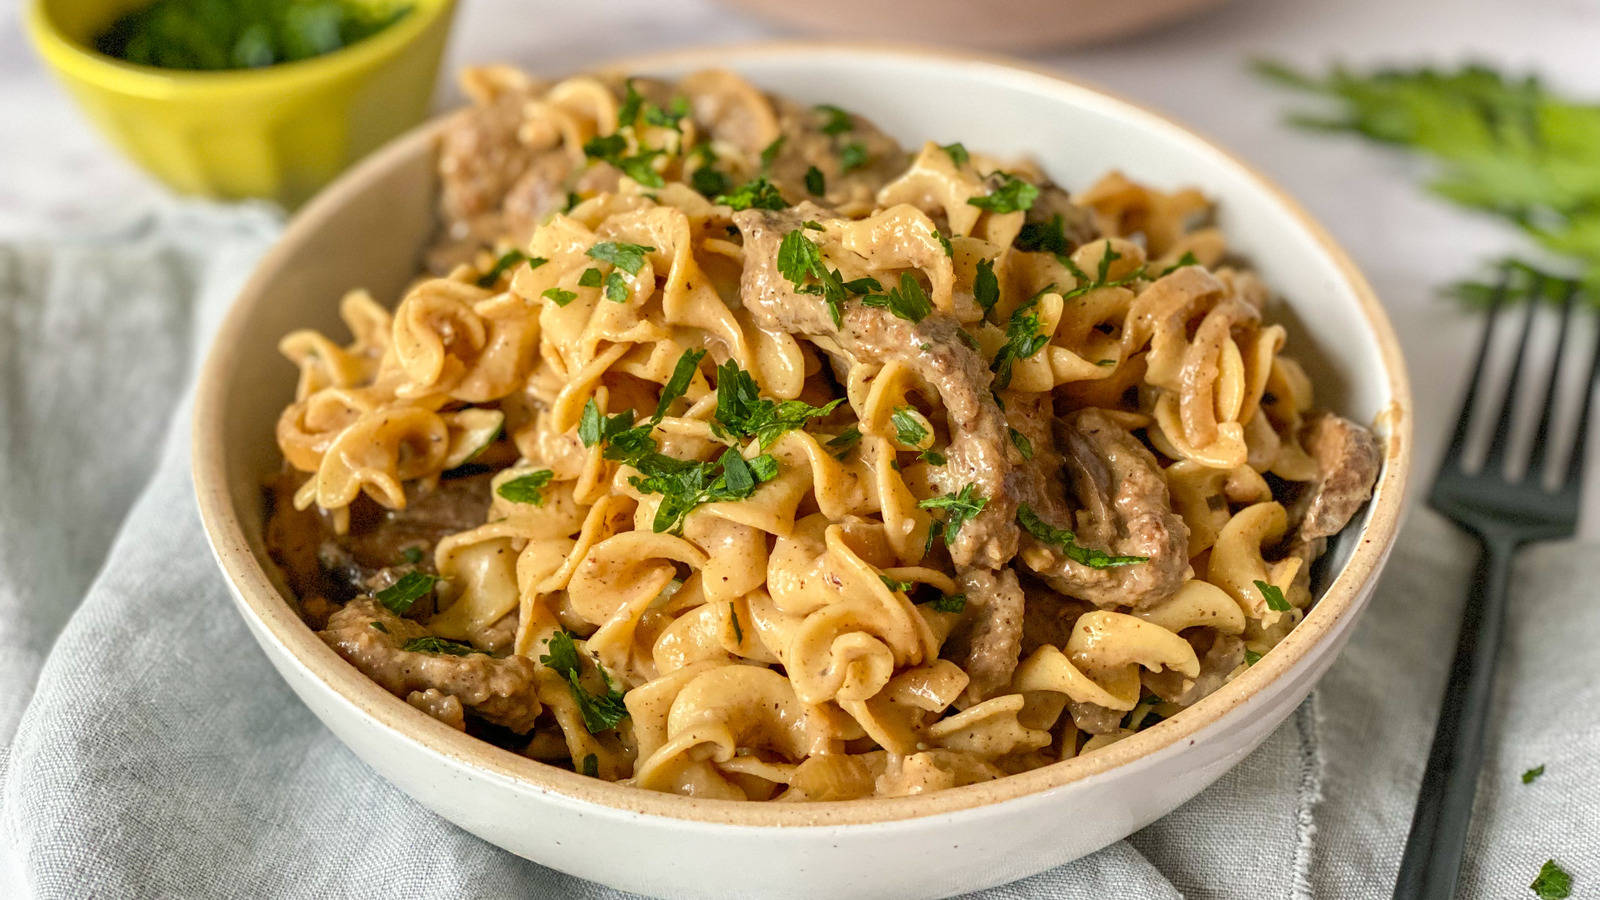 Delicious Home-cooked Beef Stroganoff with Pappardelle Wallpaper